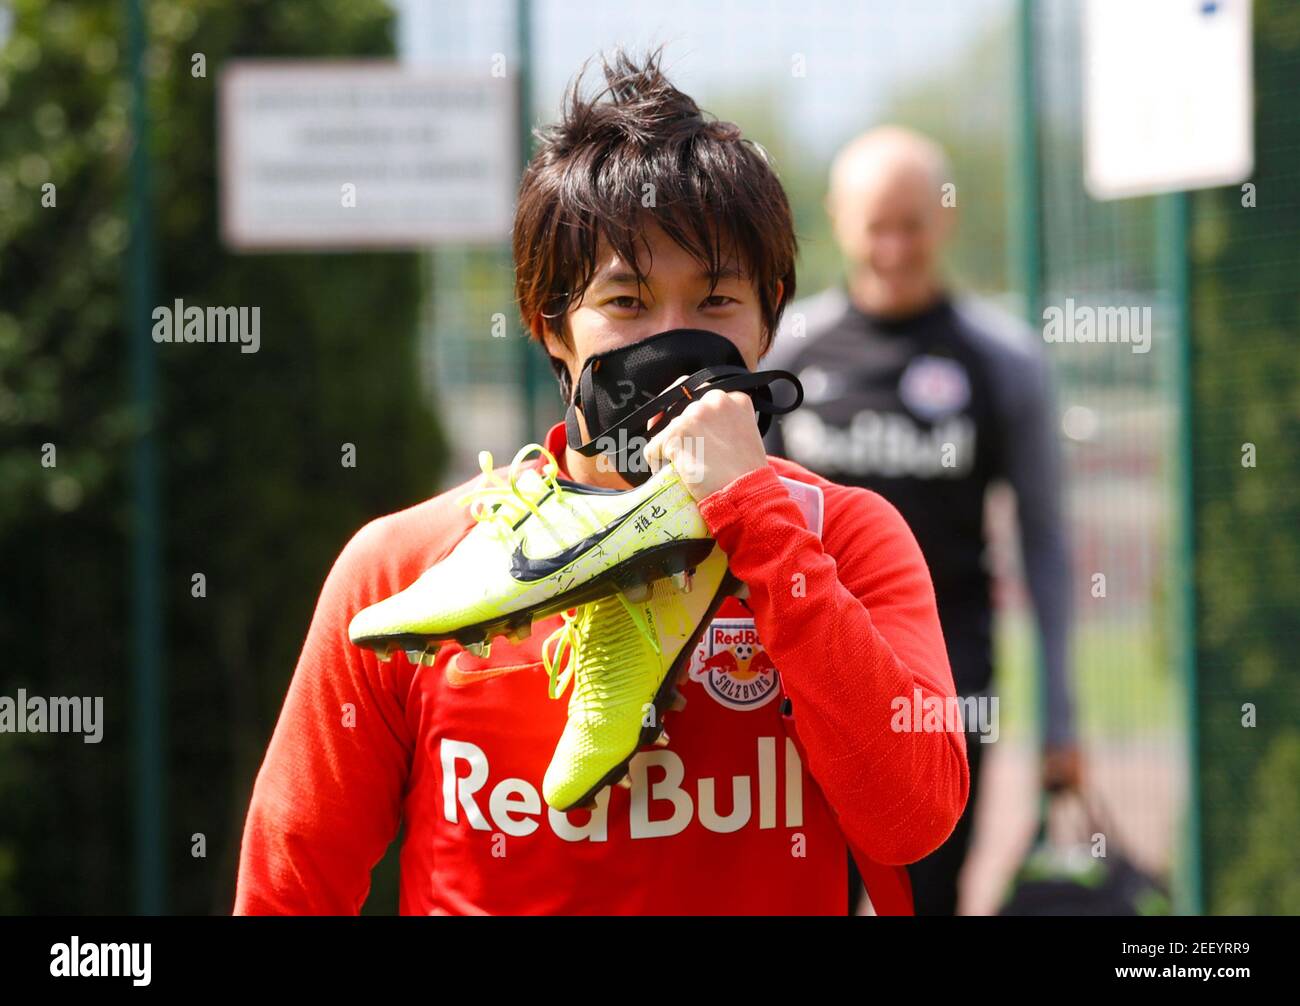 Soccer Football - Red Bull Salzburg Training - Red Bull Trainingszentrum, Salzburg, Austria - April 21, 2020 Red Bull Salzburg's Masaya Okugawa wearing a protective face mask after training despite most sport being cancelled around the world as the spread of coronavirus disease (COVID19) continues. REUTERS/Leonhard Foeger Stock Photo